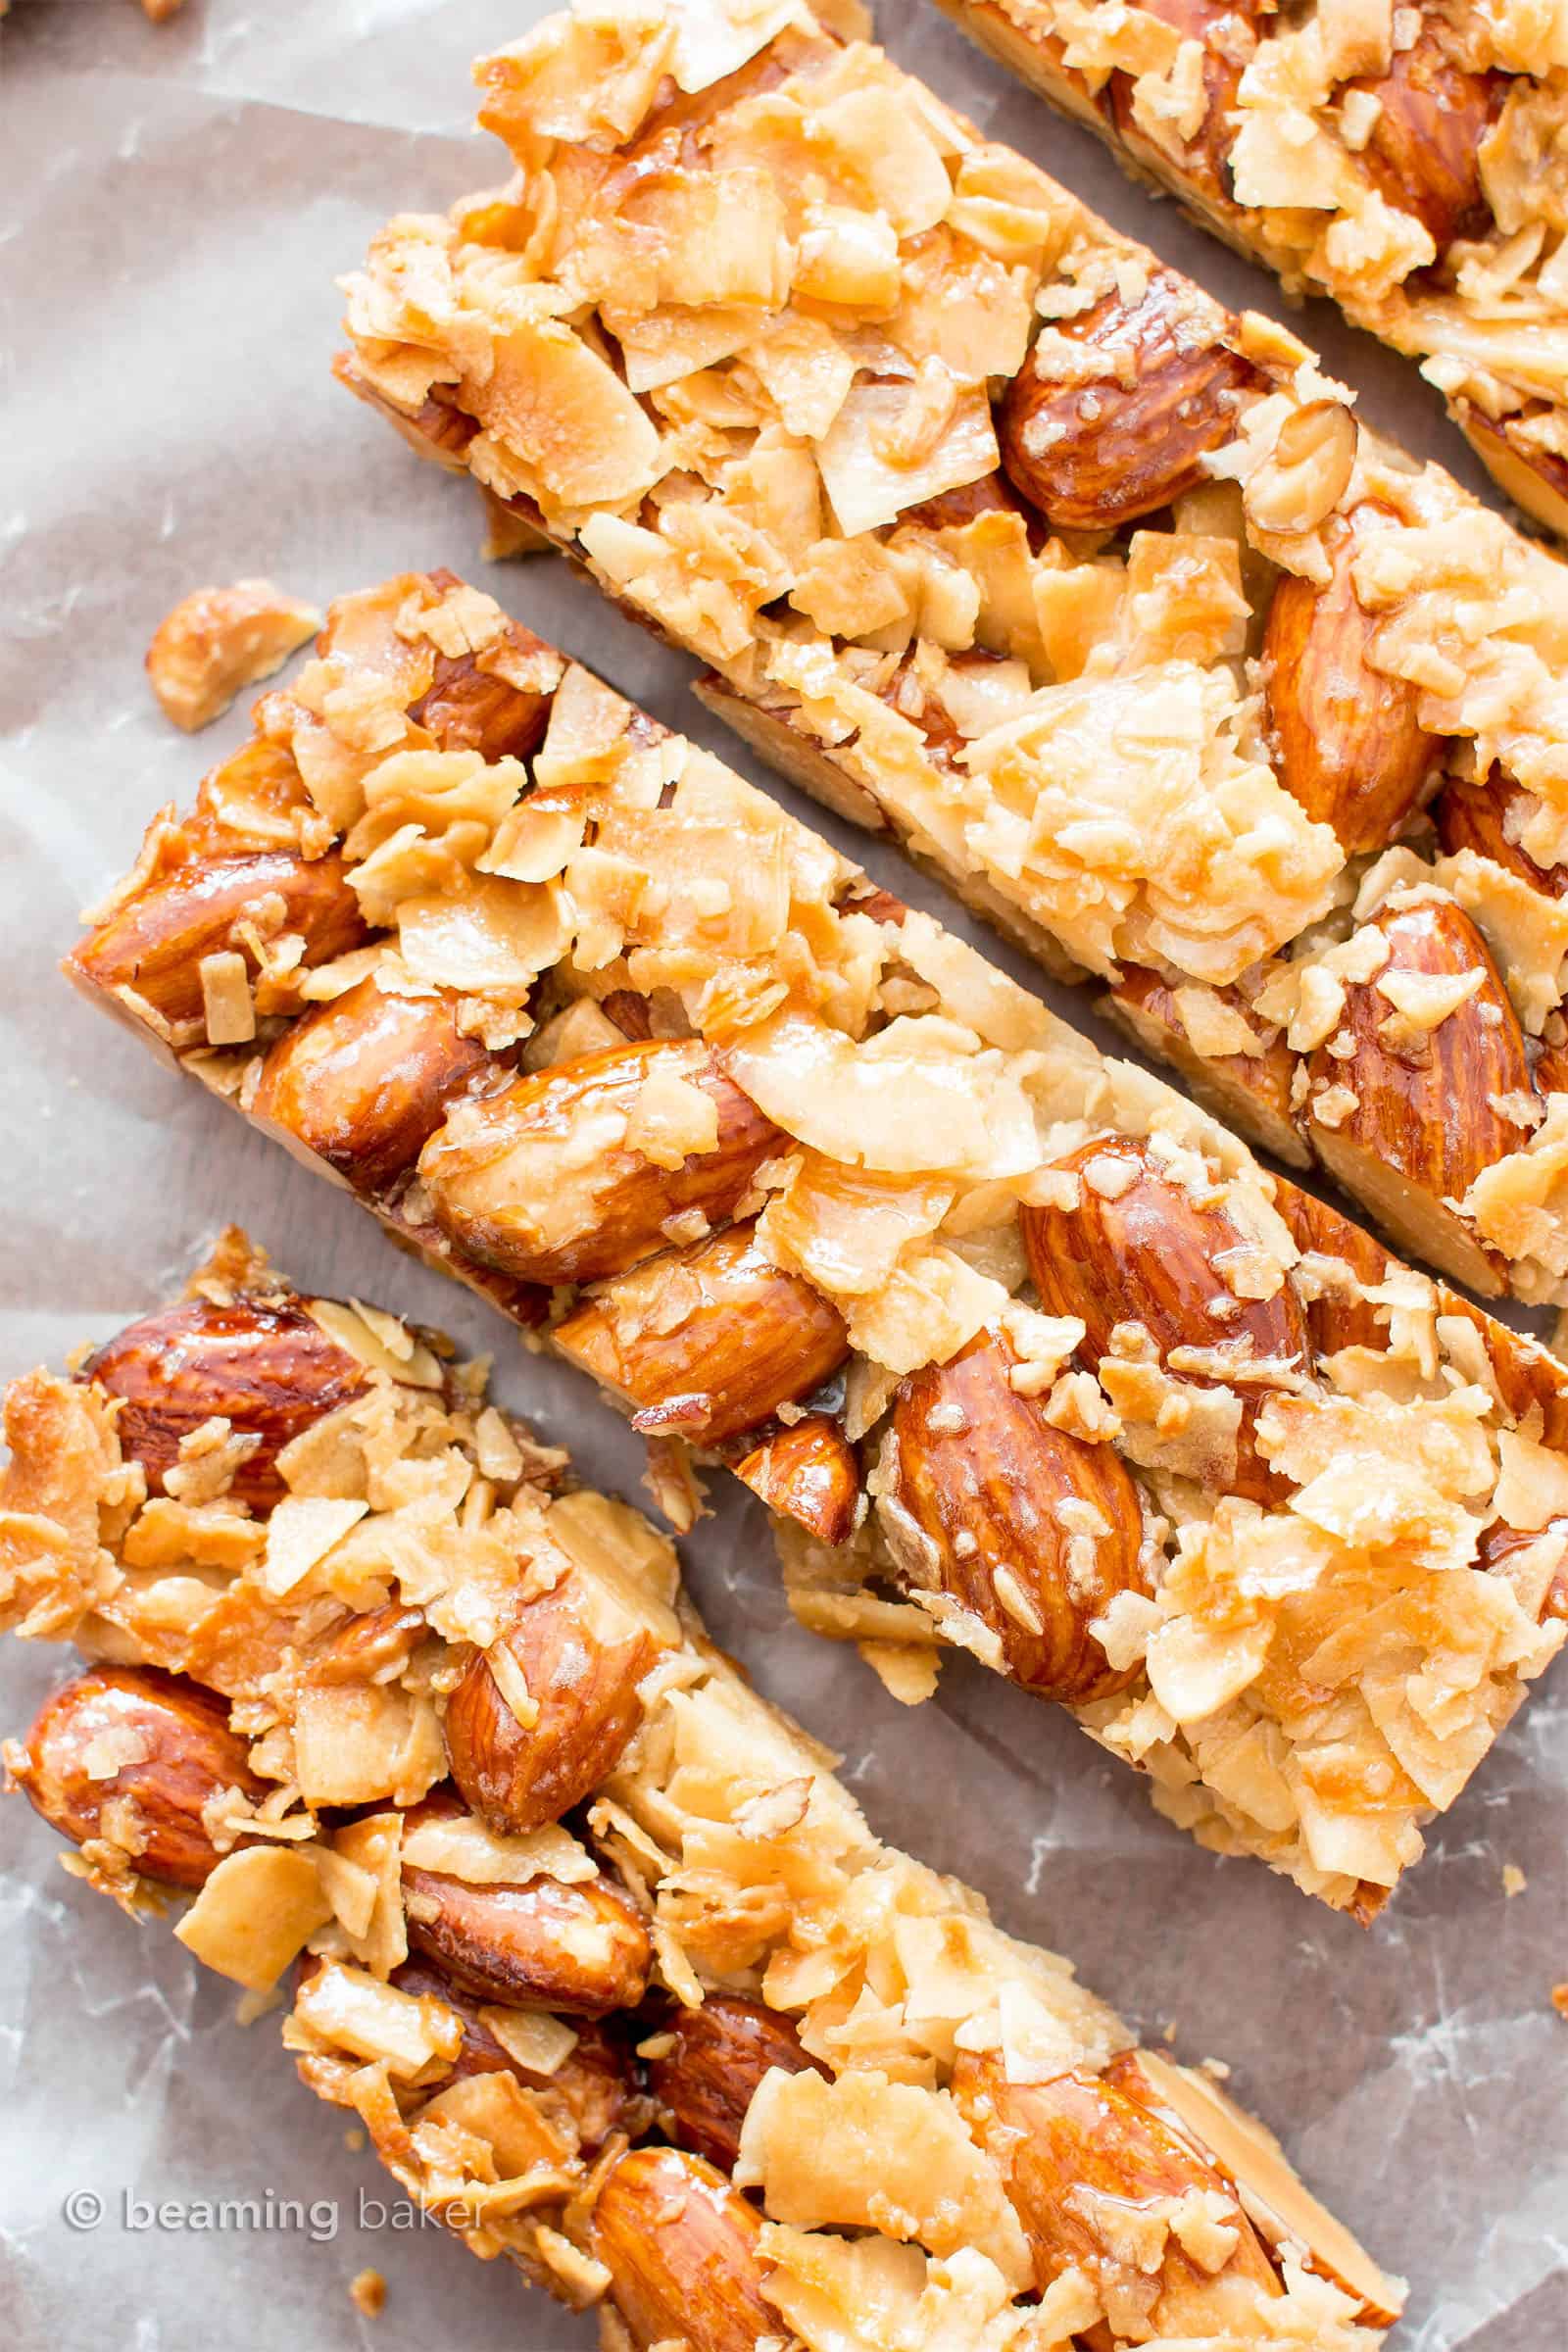 3 Ingredient Kind Bars Recipe – Almond Coconut: the easiest Kind bars, coconut and almond flavored. Just 3 ingredients for chewy, crunchy, healthy coconut almond bars! #KindBars #Kind #Almond #Coconut | Recipe at BeamingBaker.com